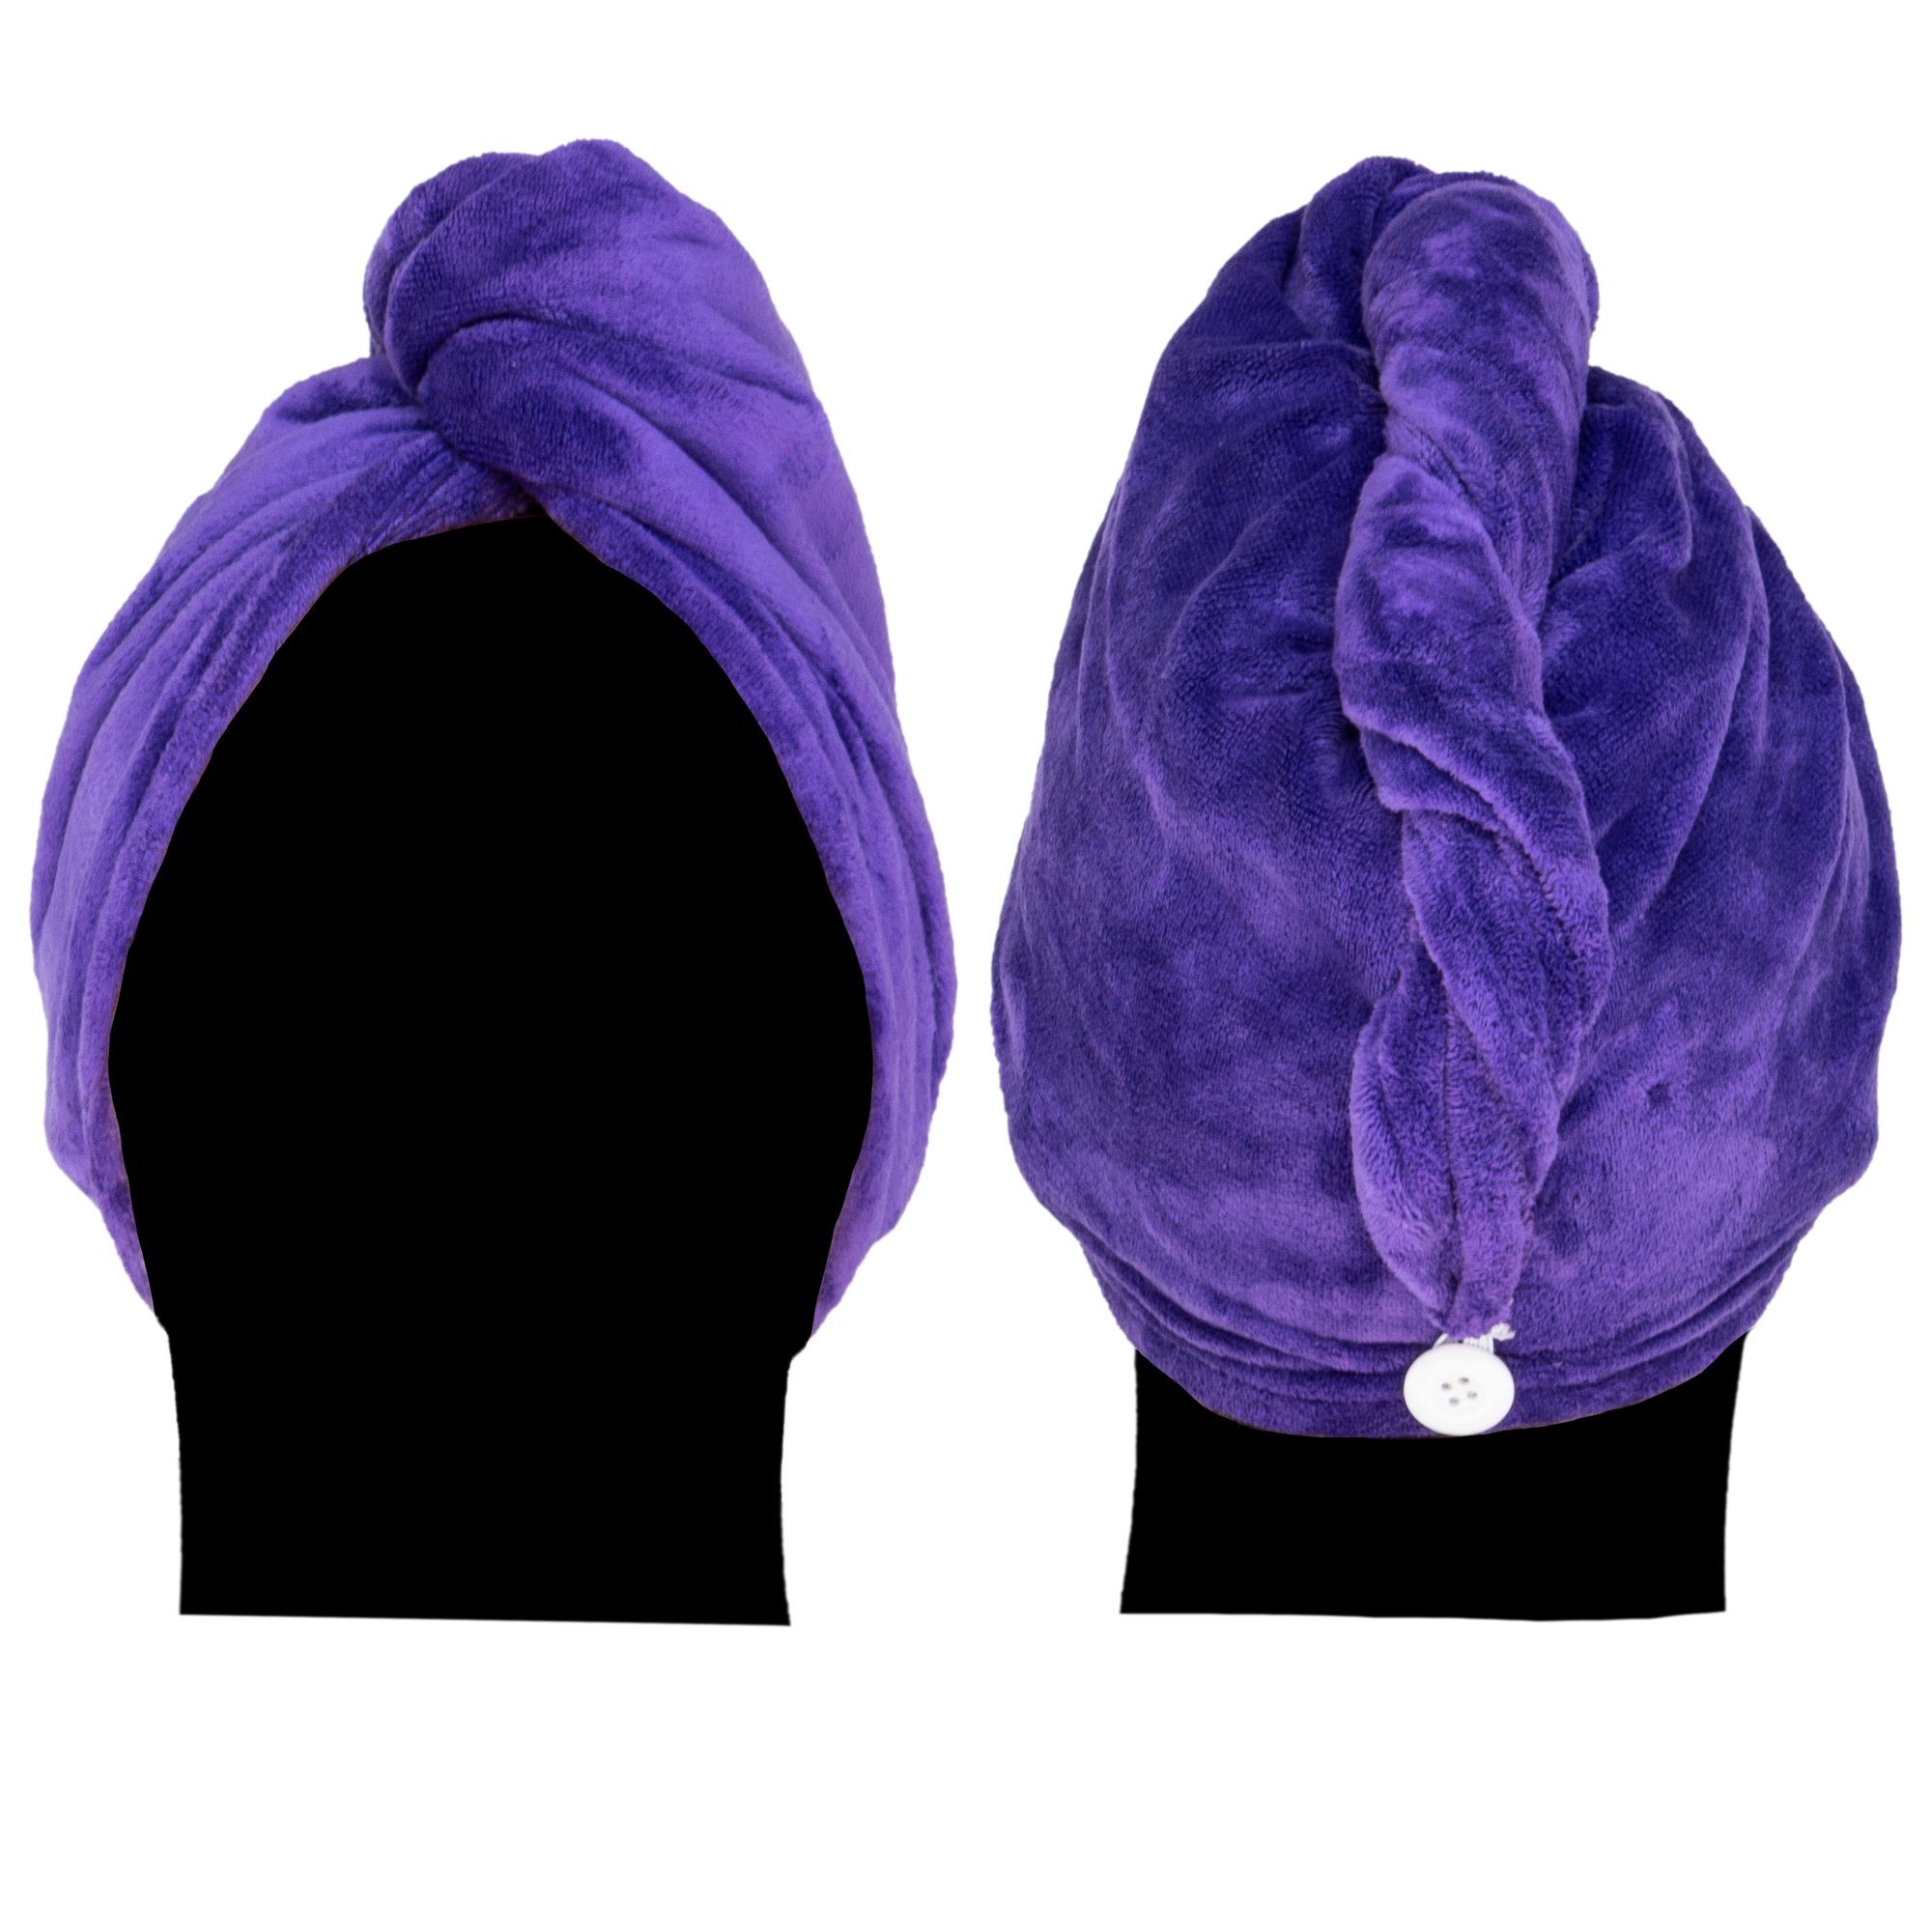 (1-St), Lila g/m² cosey Mikrofaser 350 Turban-Handtuch Turban-Handtuch - Kopf-Handtuch,